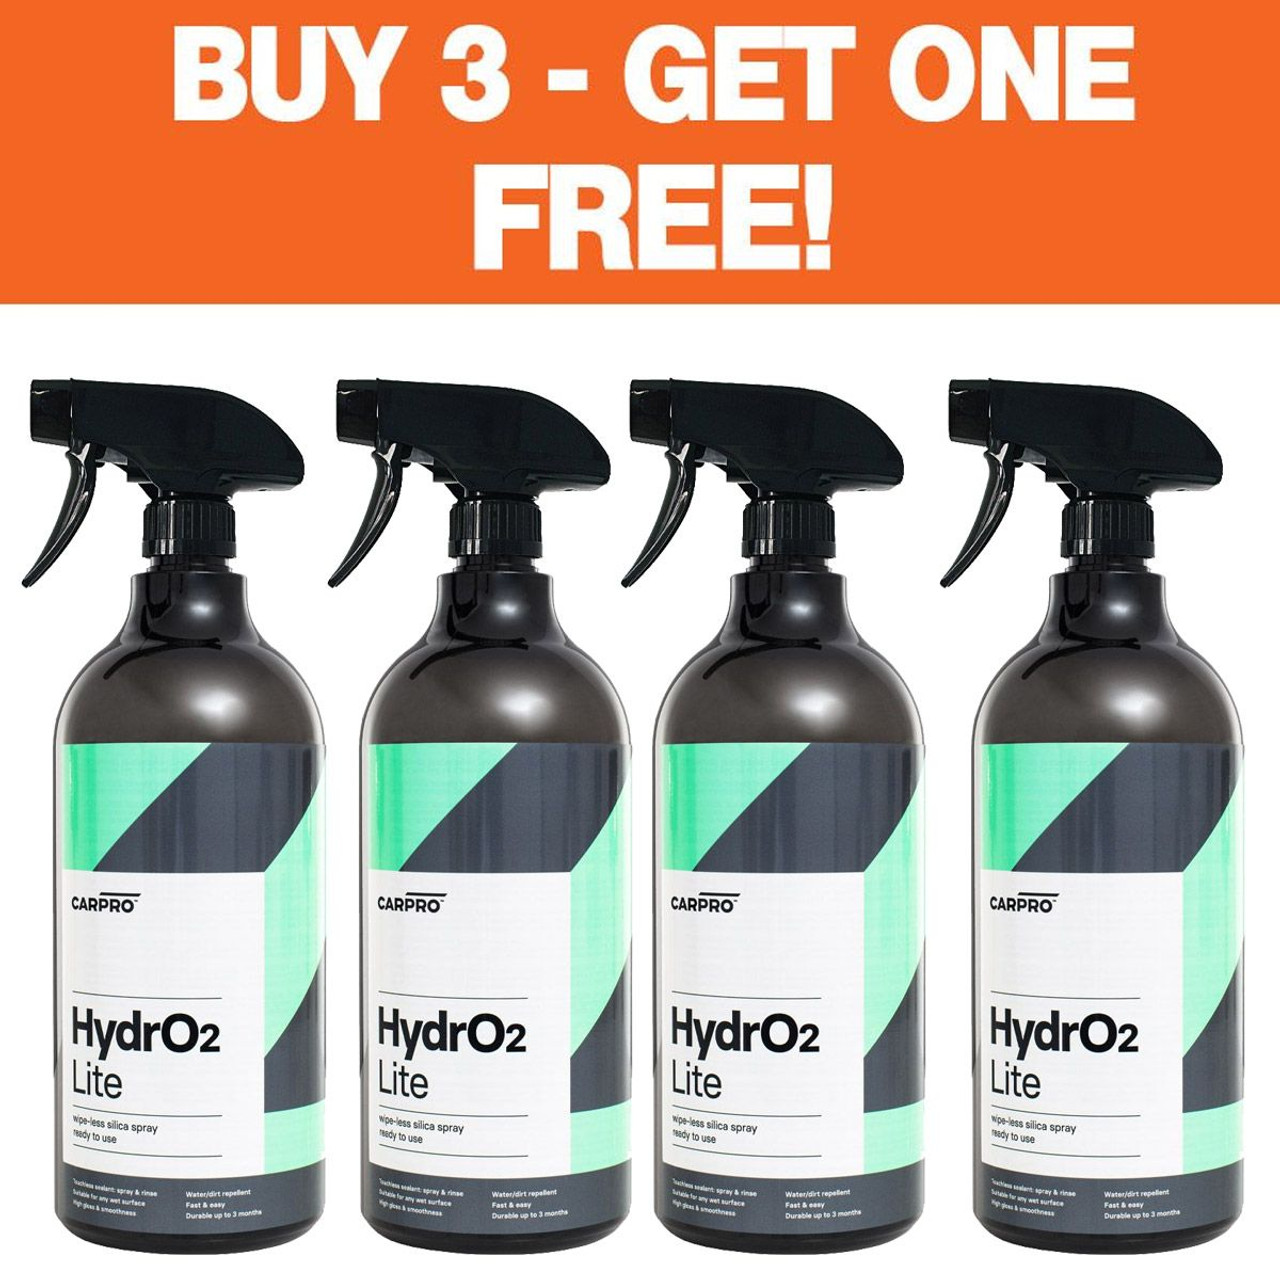 CARPRO HydrO2 Lite Touchless Silica Sealant 1 Liter - Buy 3 - GET ONE FREE